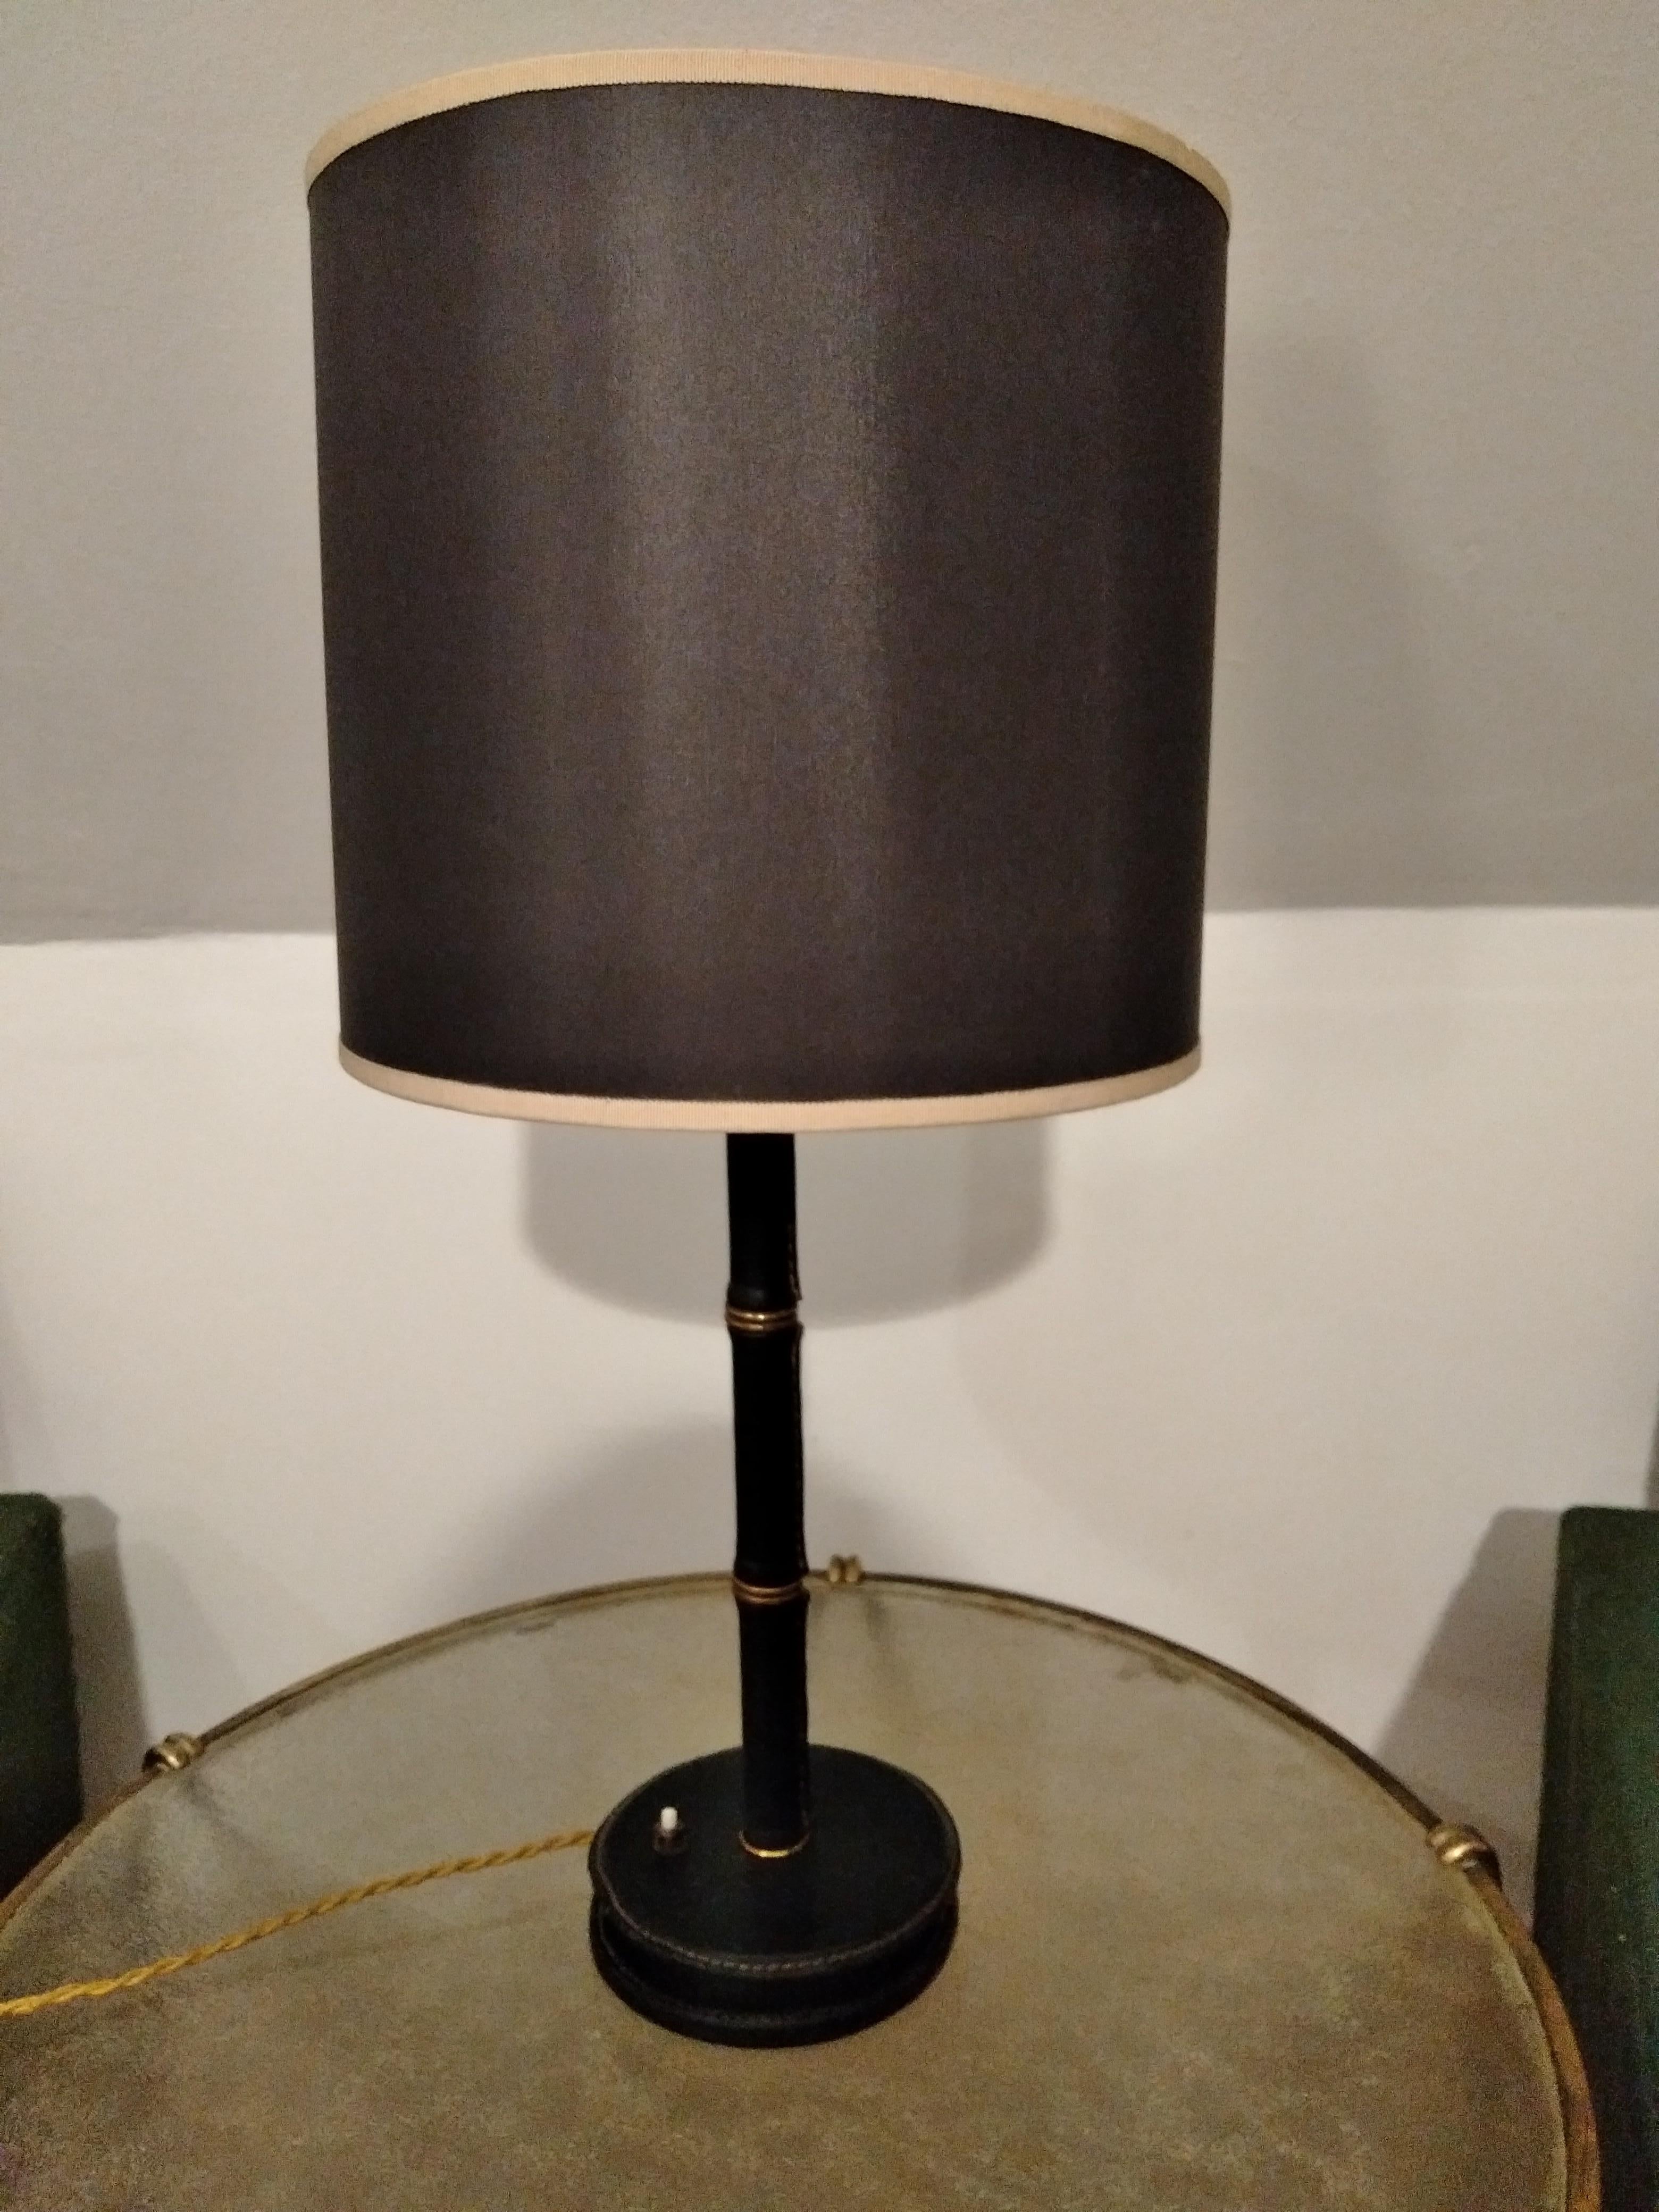 A stitched leather table lamp designed by Jacques Adnet in France in 1950s.
Bamboo form with handstitched leather and brass rings are characteristic of the Jacques Adnet's work.
French bayonet socket, bakelite switch and new wiring.
The